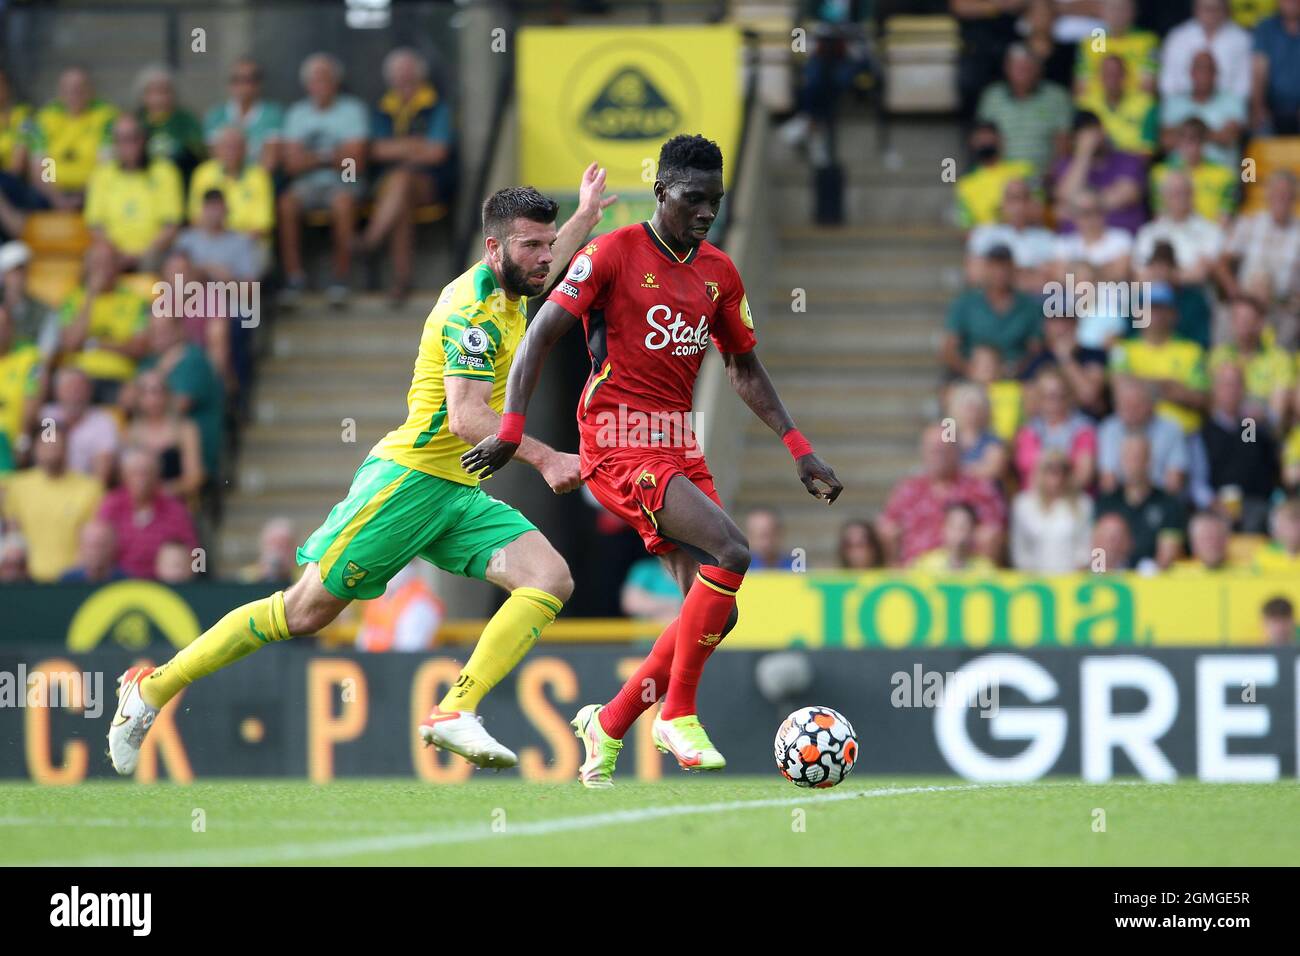 Norwich, UK. 18th Sep, 2021. Ismala Sarr of Watford gets ahead of Grant Hanley of Norwich City during the Premier League match between Norwich City and Watford at Carrow Road on September 18th 2021 in Norwich, England. (Photo by Mick Kearns/phcimages.com) Credit: PHC Images/Alamy Live News Stock Photo